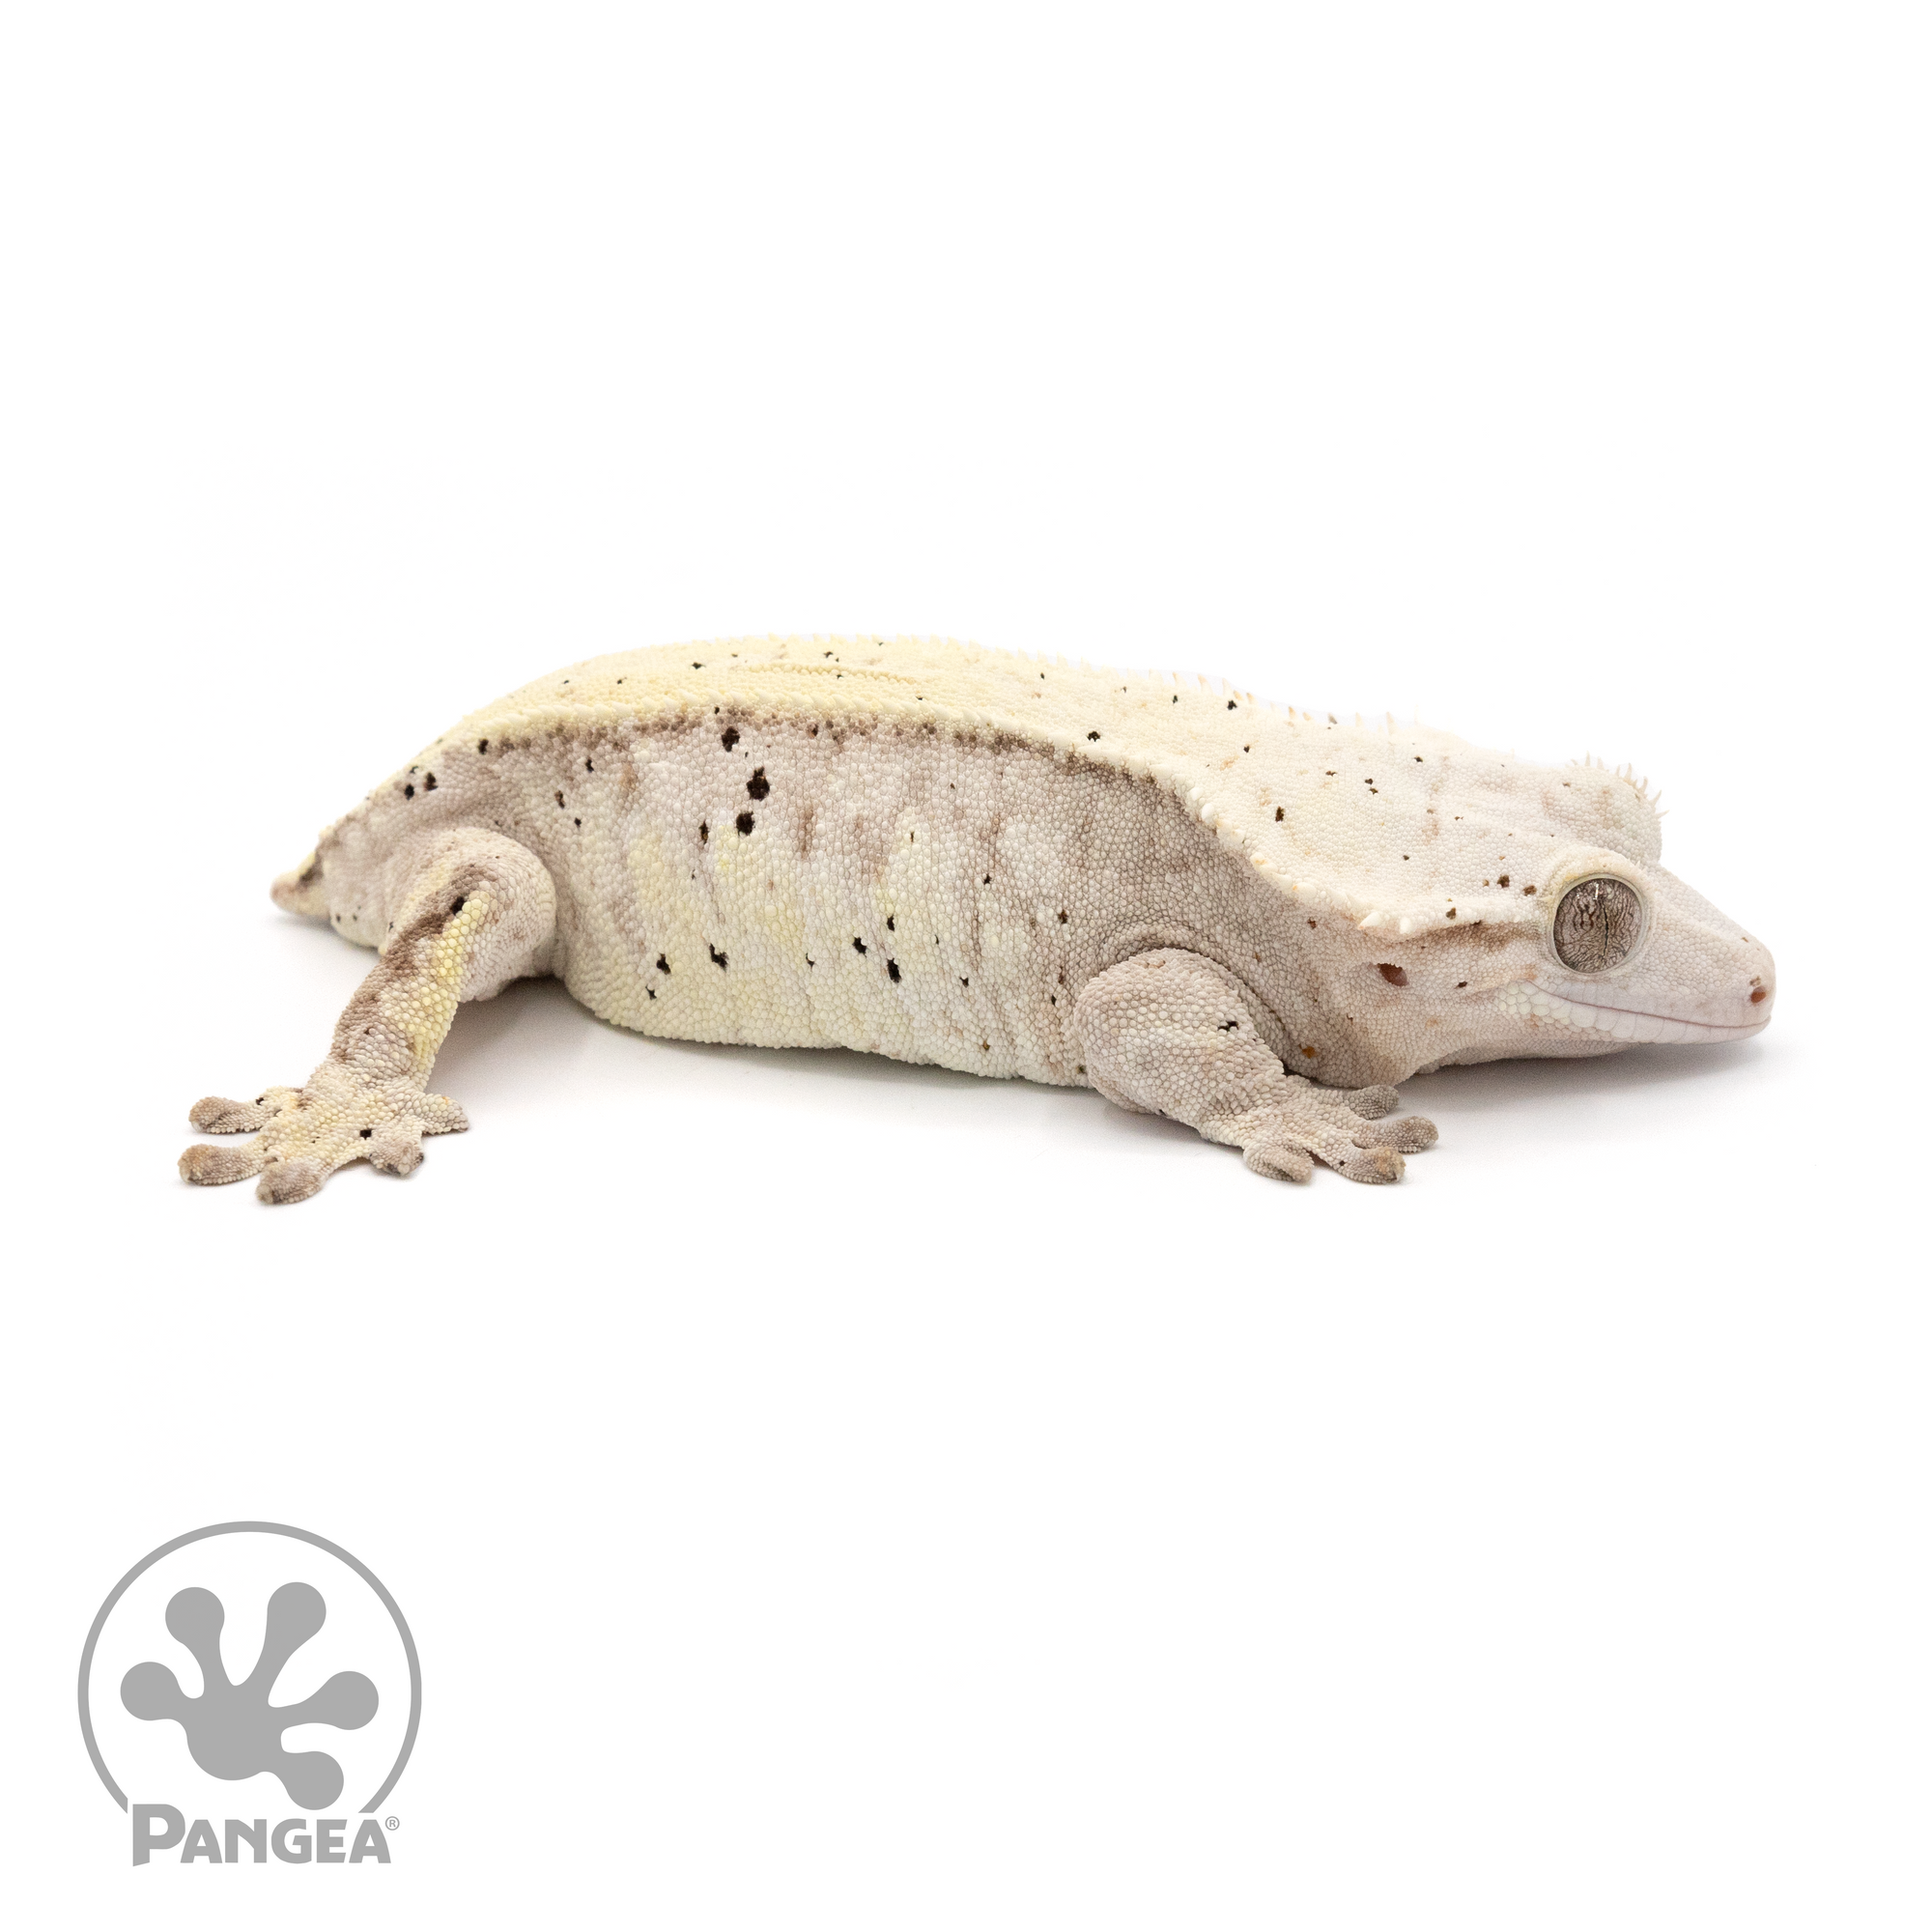 Female Lavender Dalmatian Crested Gecko Cr-1320 looking right 